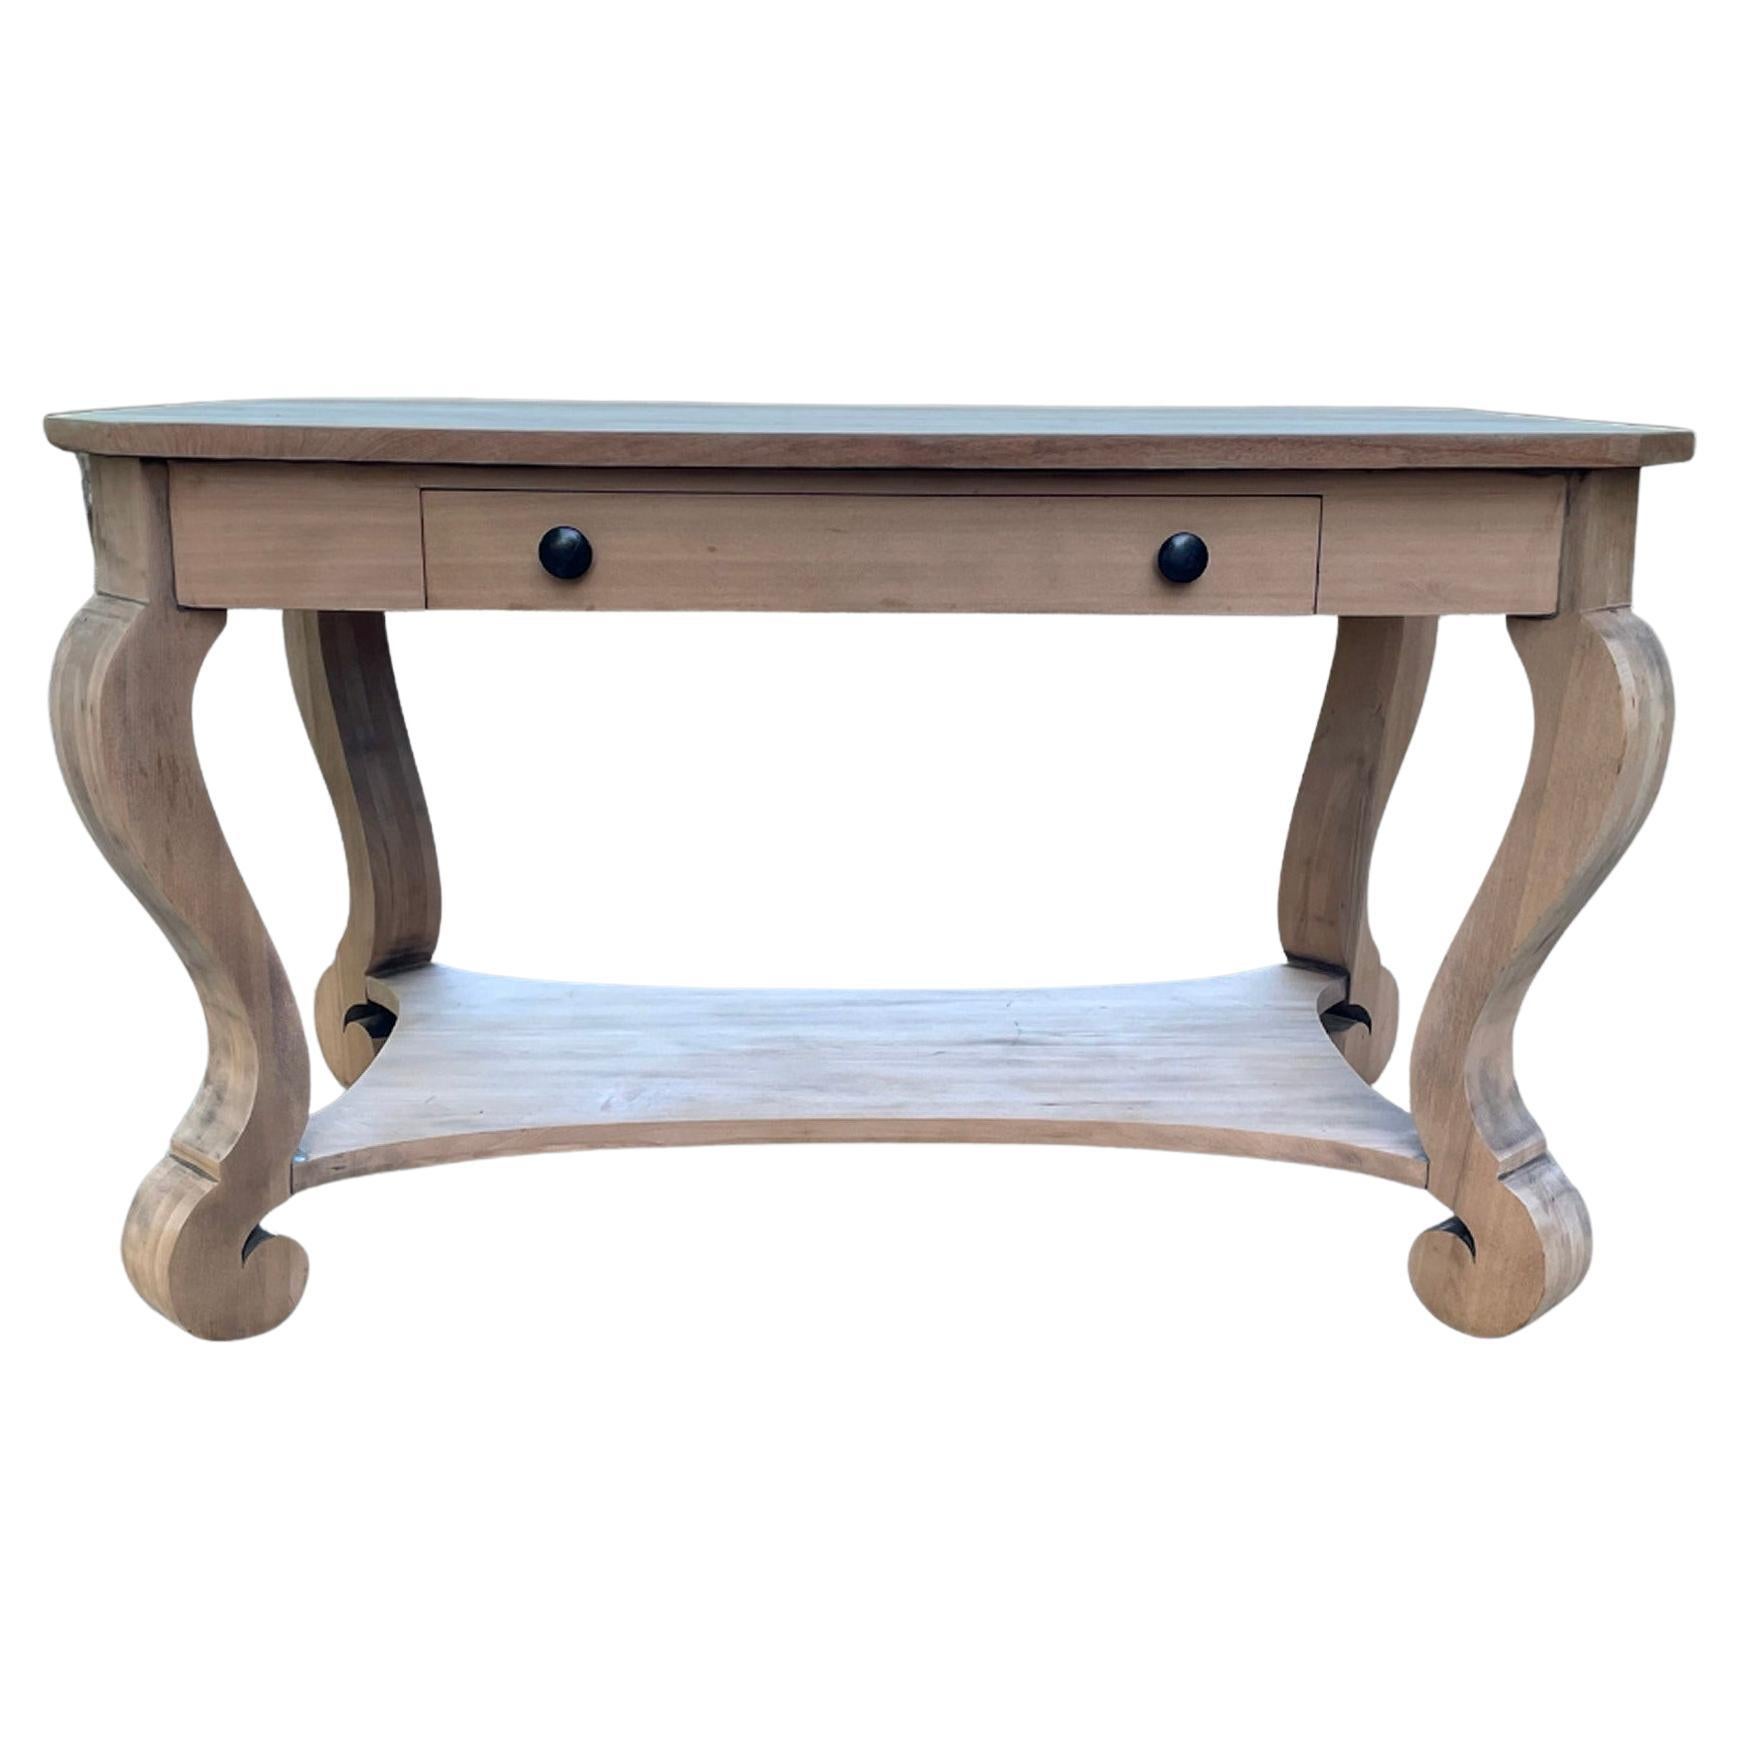 Stripped Mahogany French Console / Centre Table